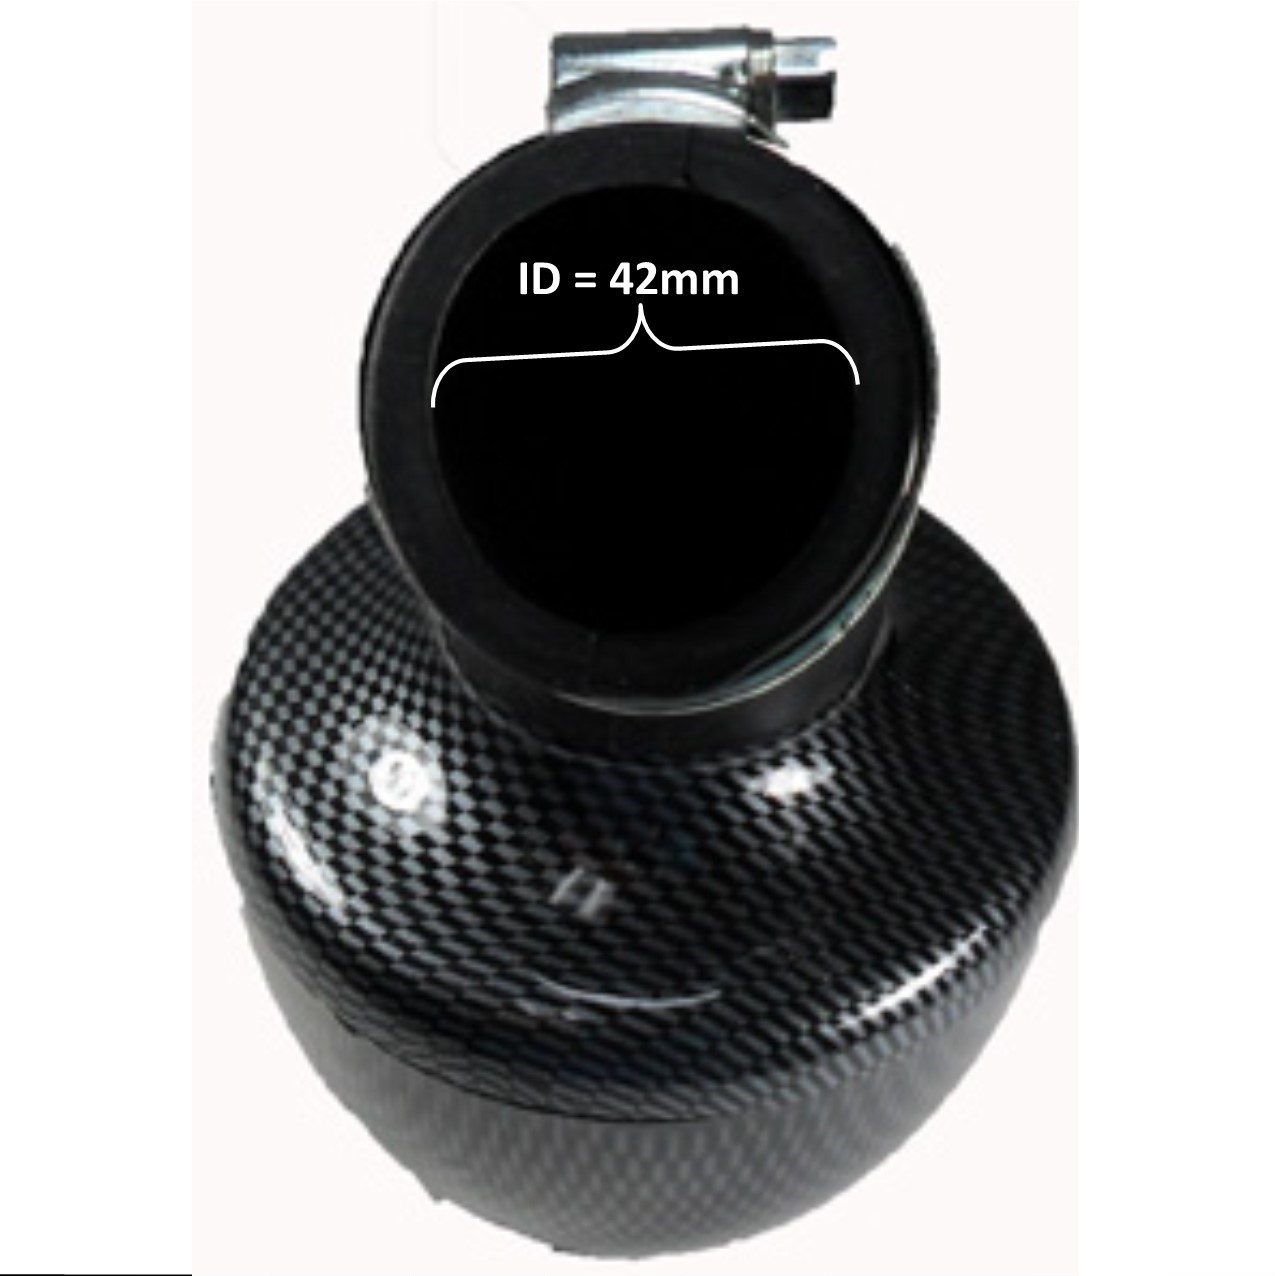 High Performance Carbon Graphite Air Filter ID=42mm Fits 125-150cc ATV, GoKarts, Scooters with PD24J Carburetors - Click Image to Close